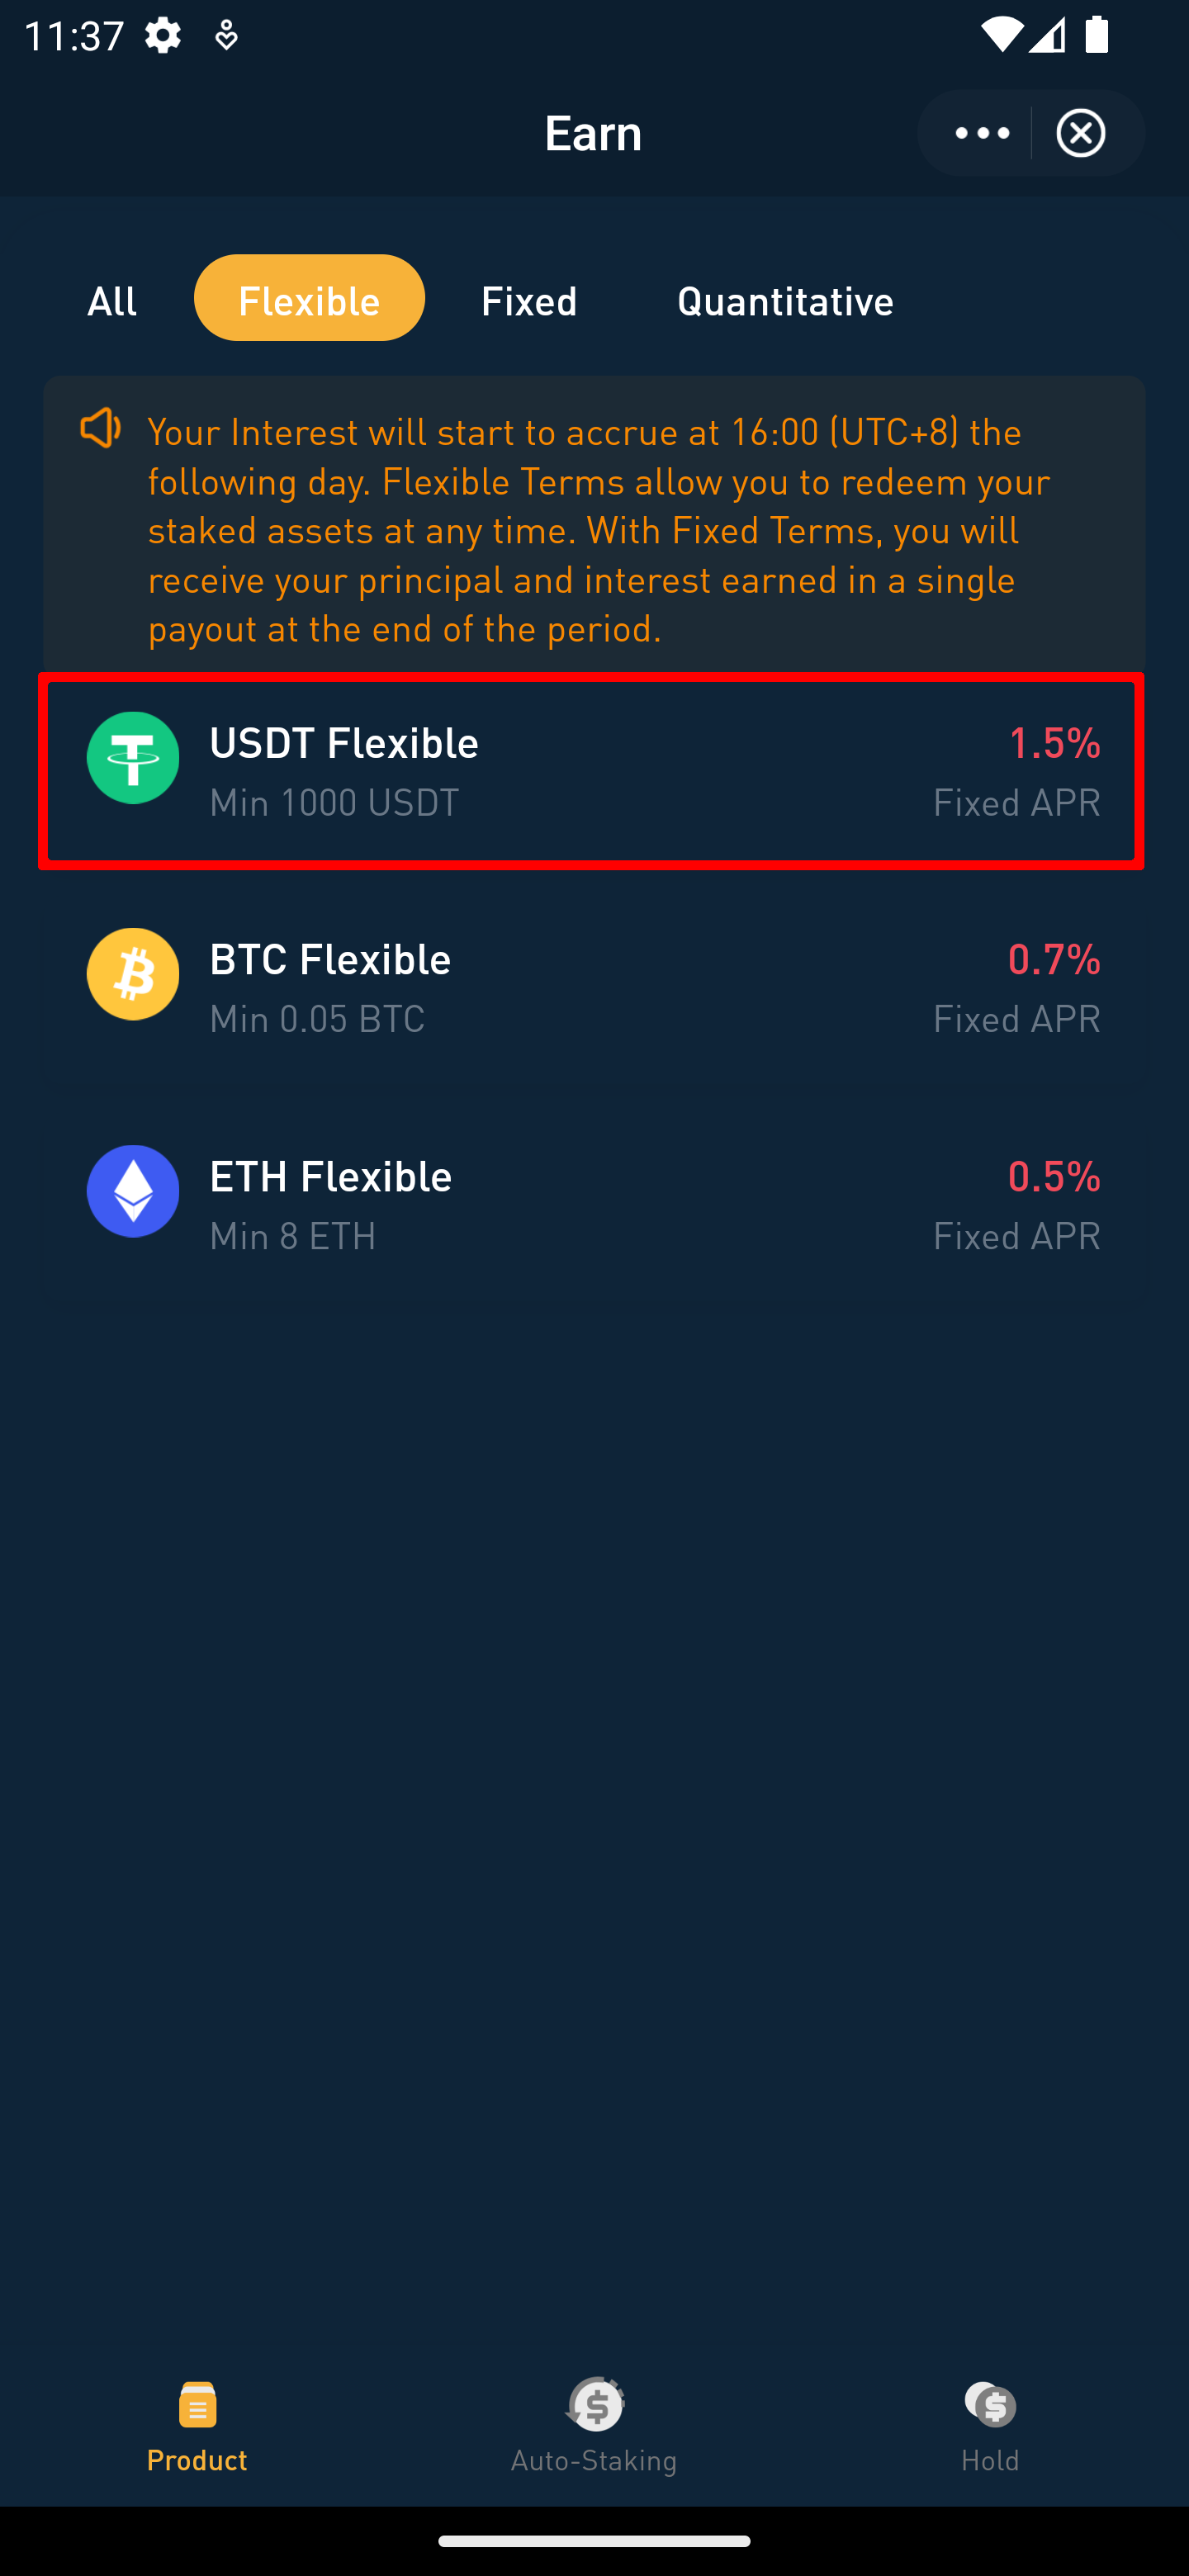 8v app earn flexible products with USDT flexible product highlighted